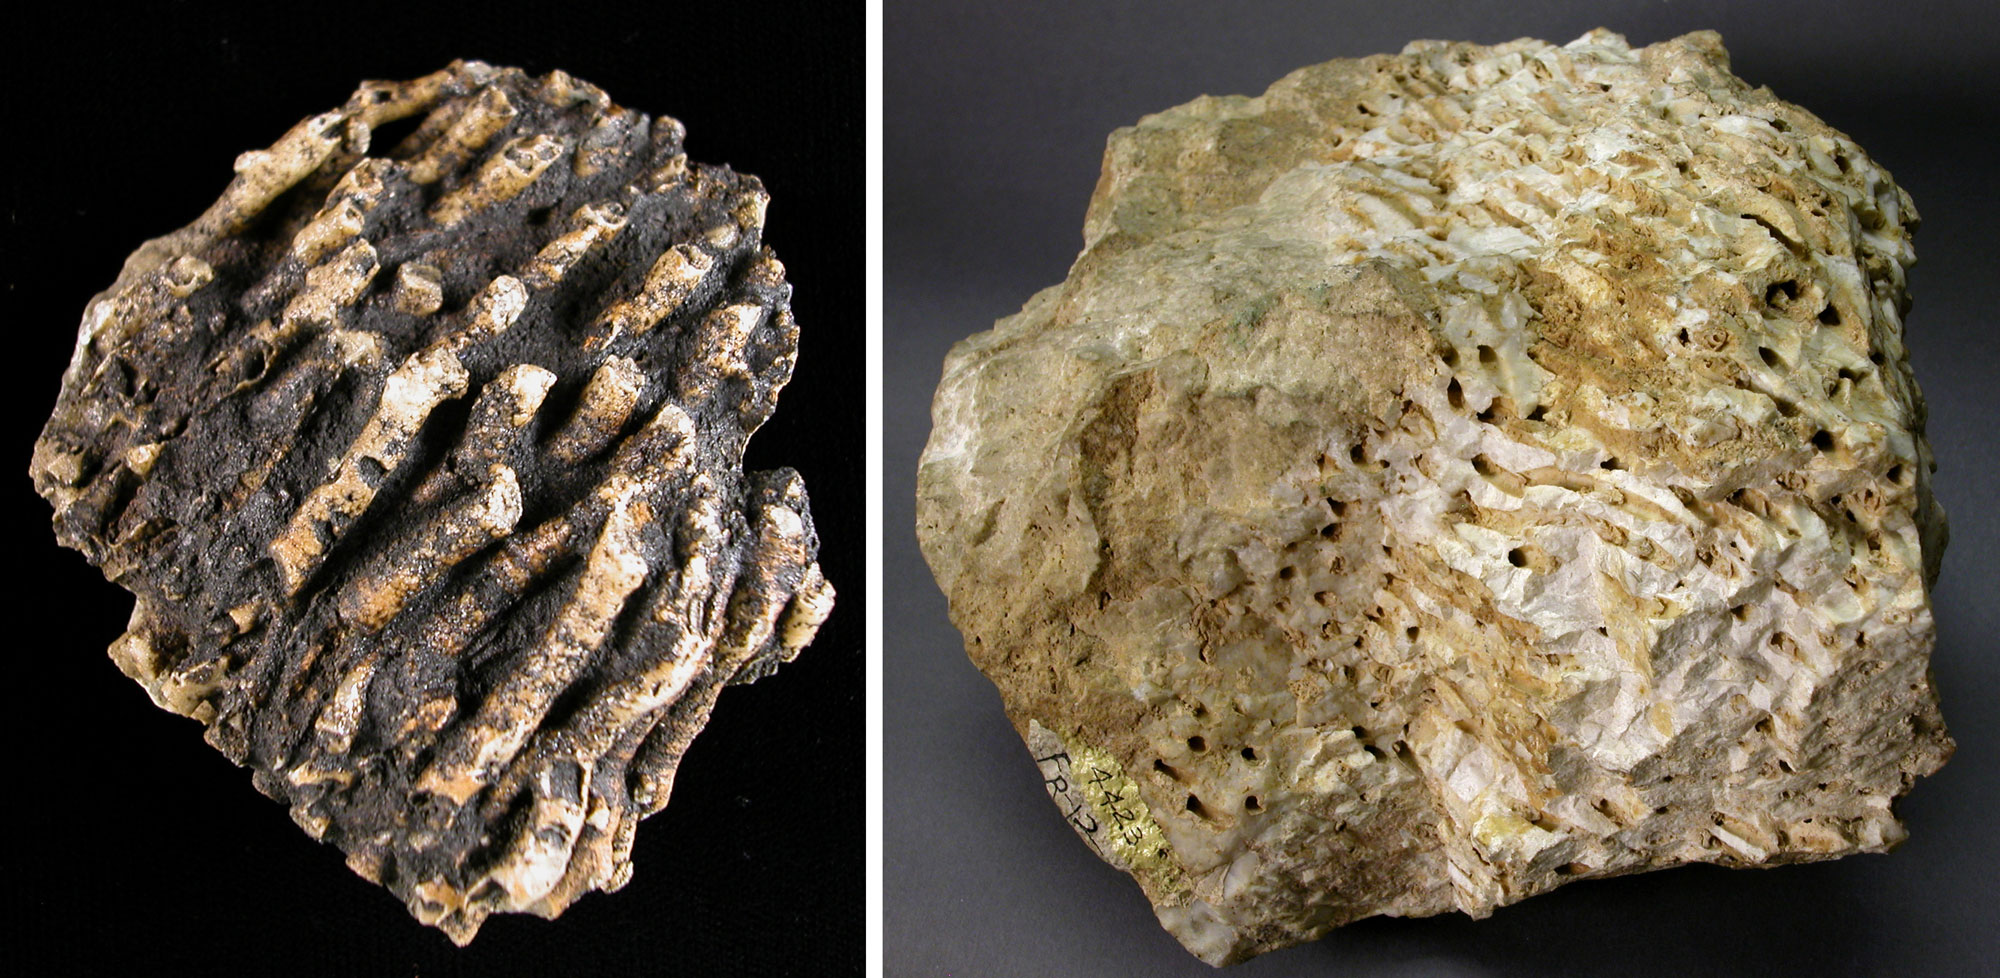 2-Panel figure showing Mississippian corals from the Redwall Limestone, Grand Canyon. Panel 1: Photo of a coral that appears to be made up of a group of parallel tubes. Panel 2: A more typical tabulate coral made up of what appear to be a group of angular columns.